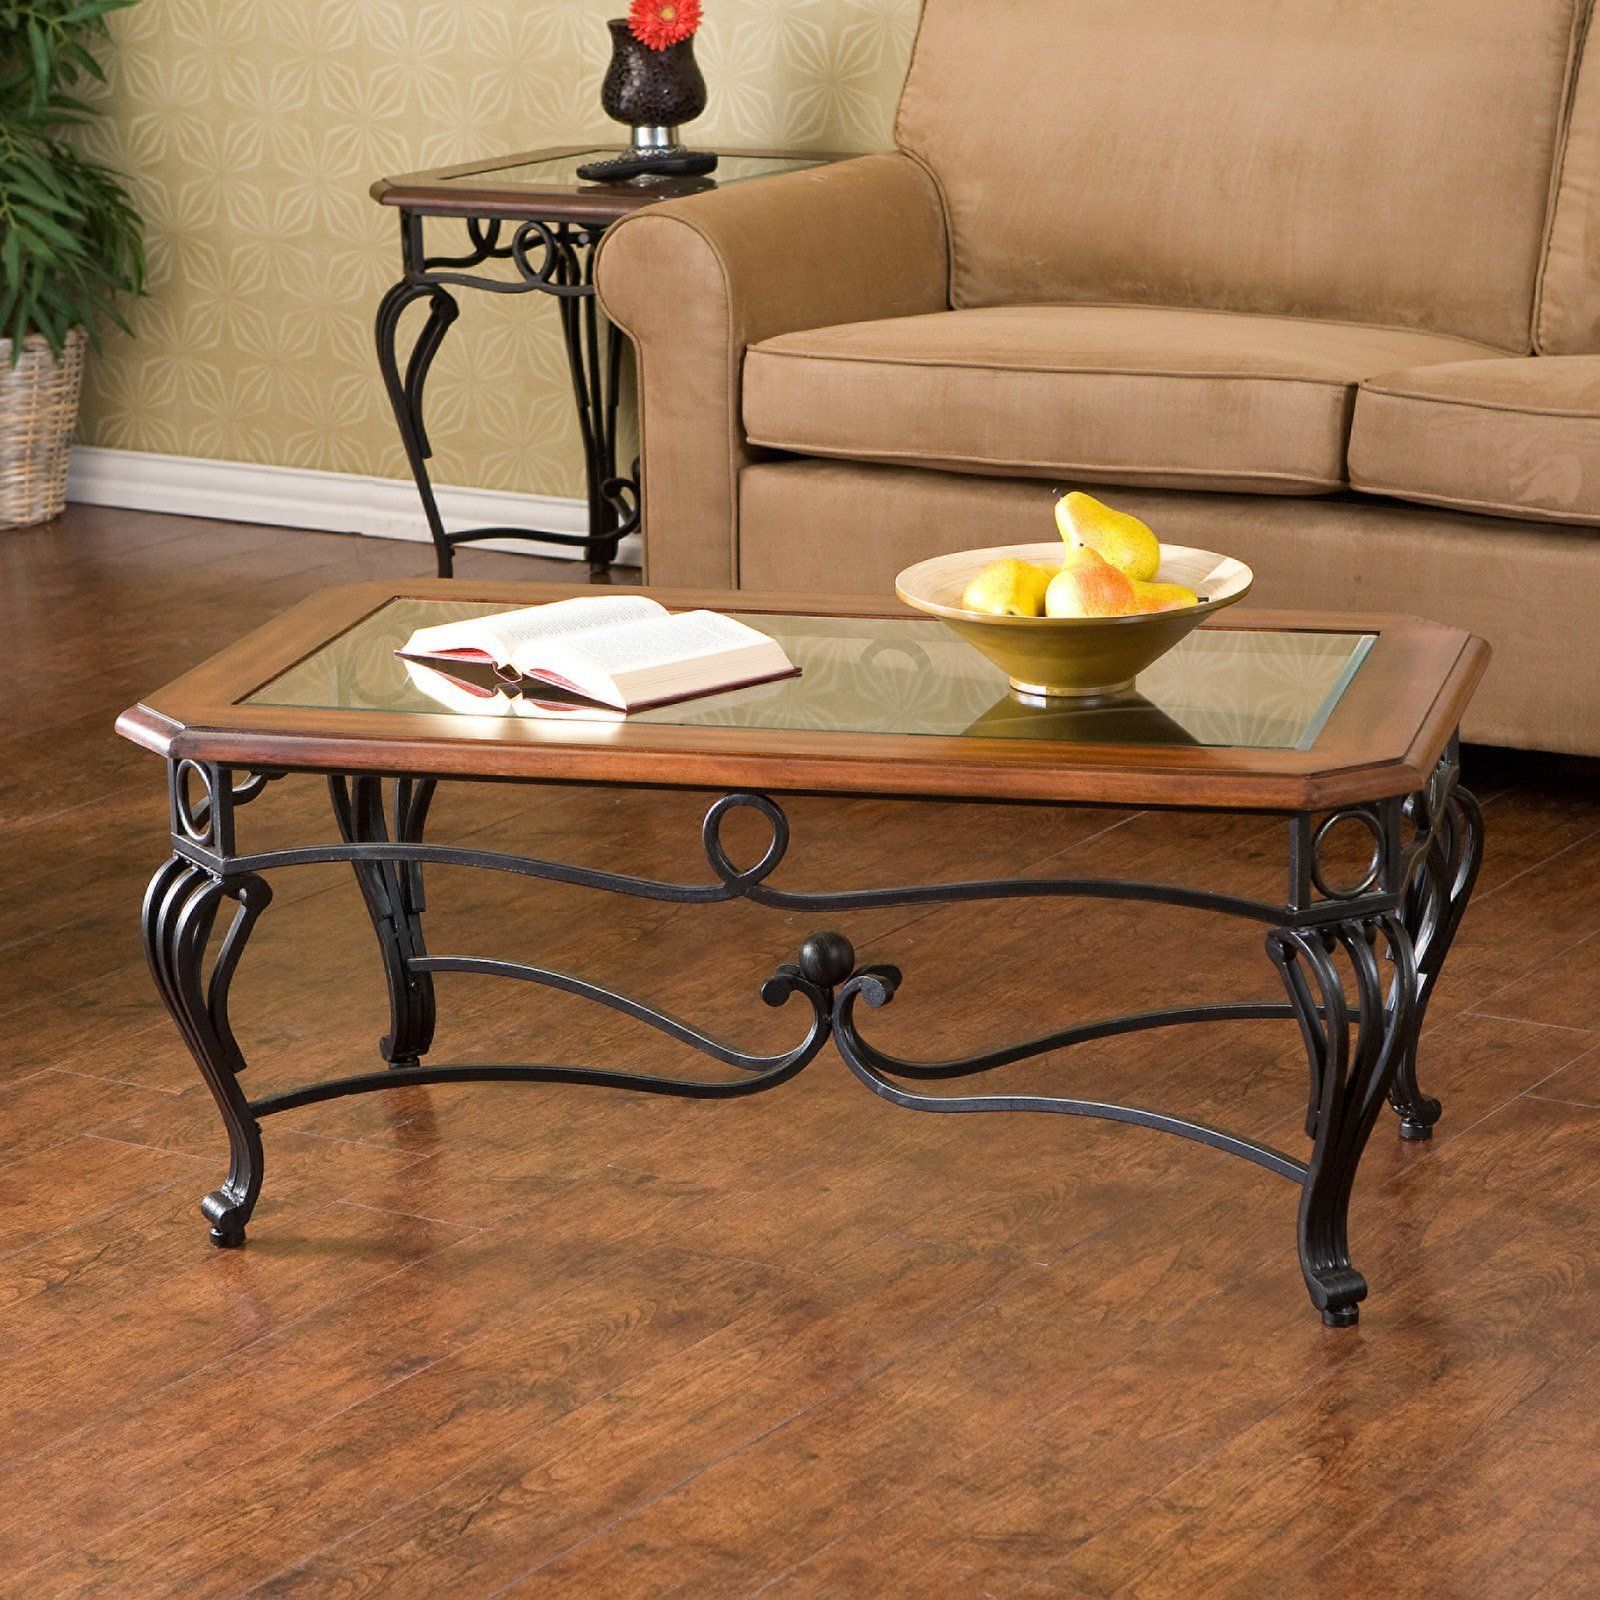 Southern Enterprises Prentice Coffee Table | Www (View 6 of 20)